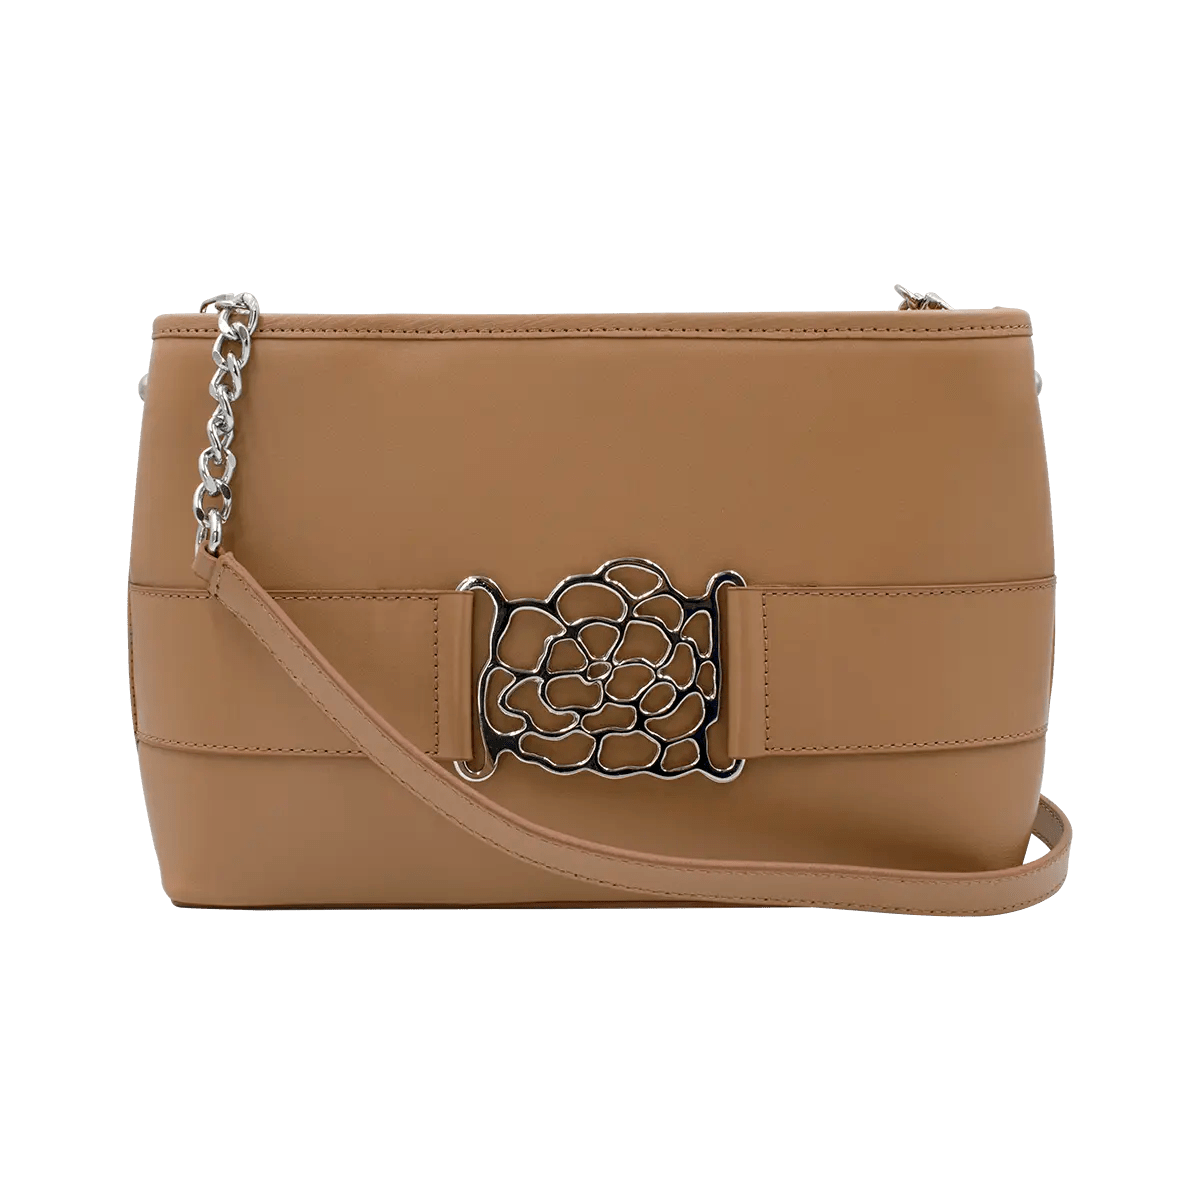 Small Leather Shoulder Bag With Metal Accent